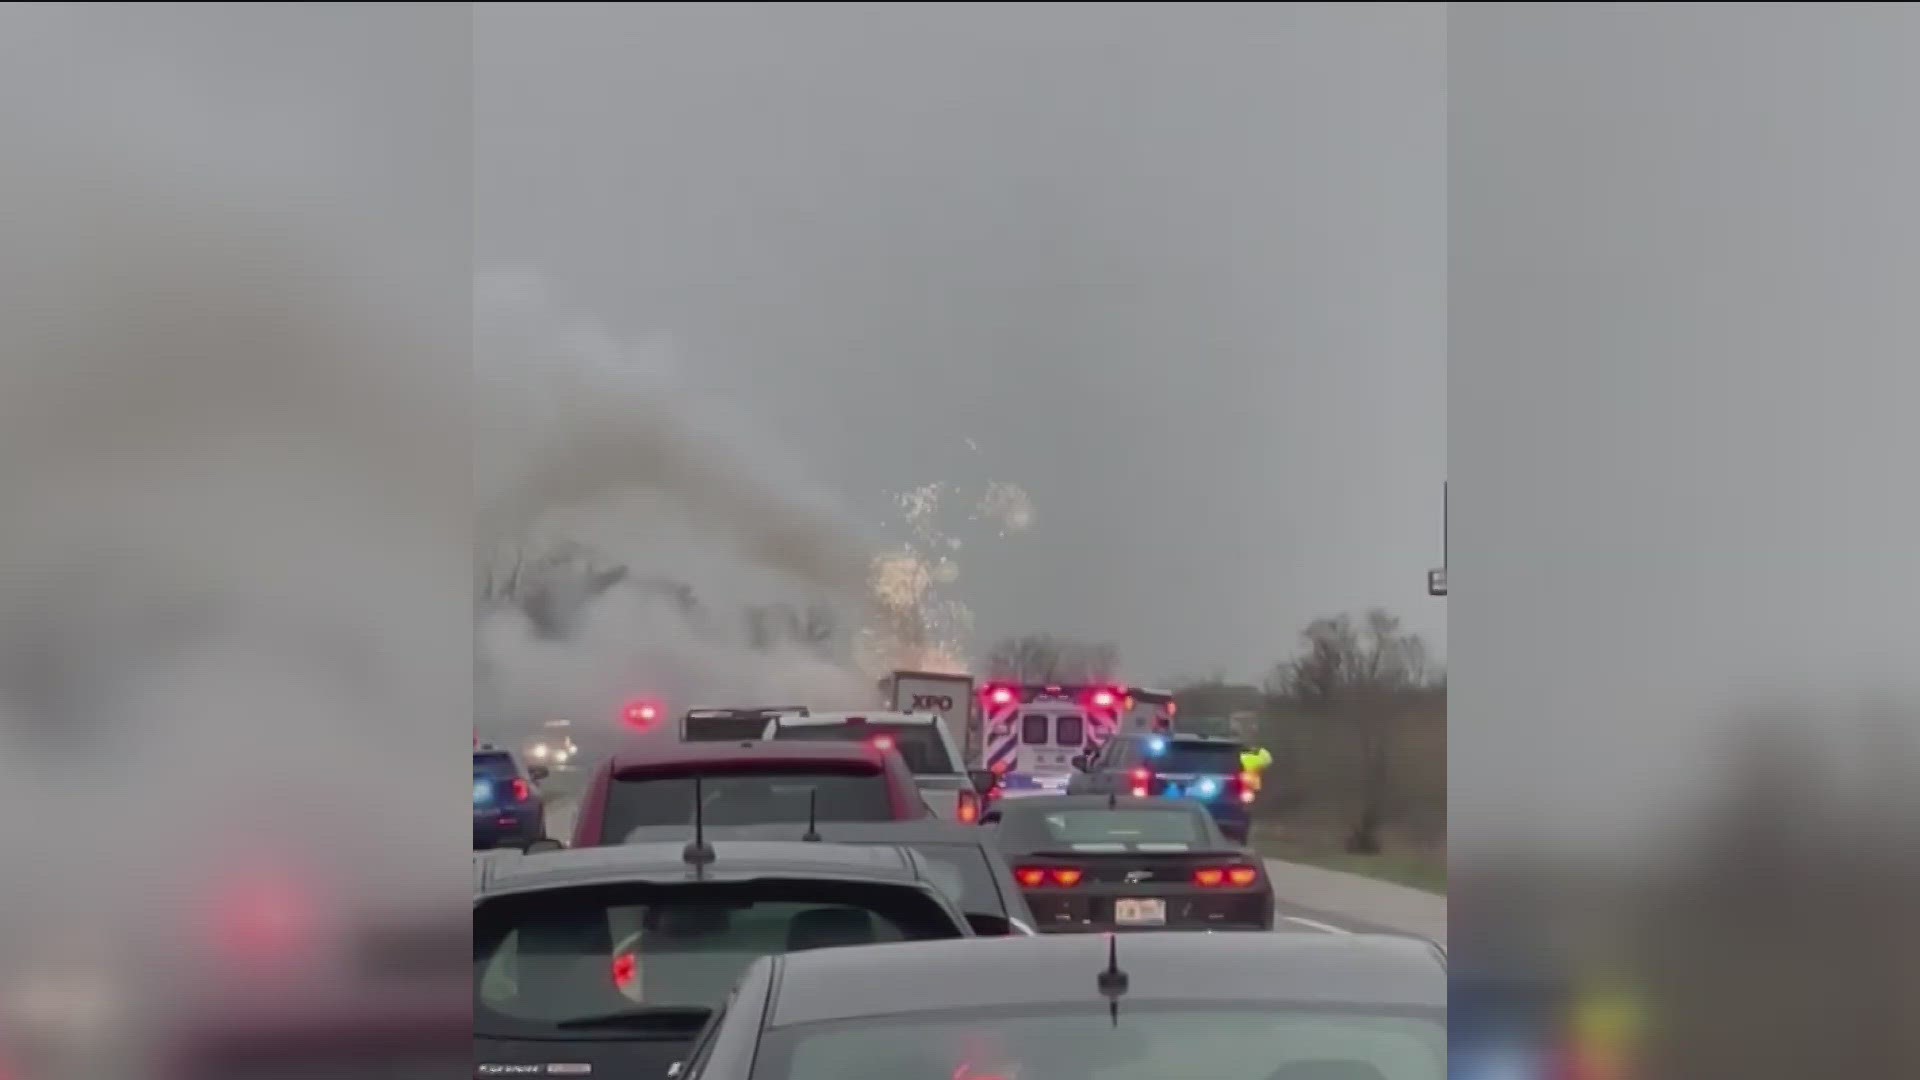 Viewer Rae Mirah sent WTOL 11 video of the incident. Police say a tractor-trailer carrying fireworks caught fire Friday morning.